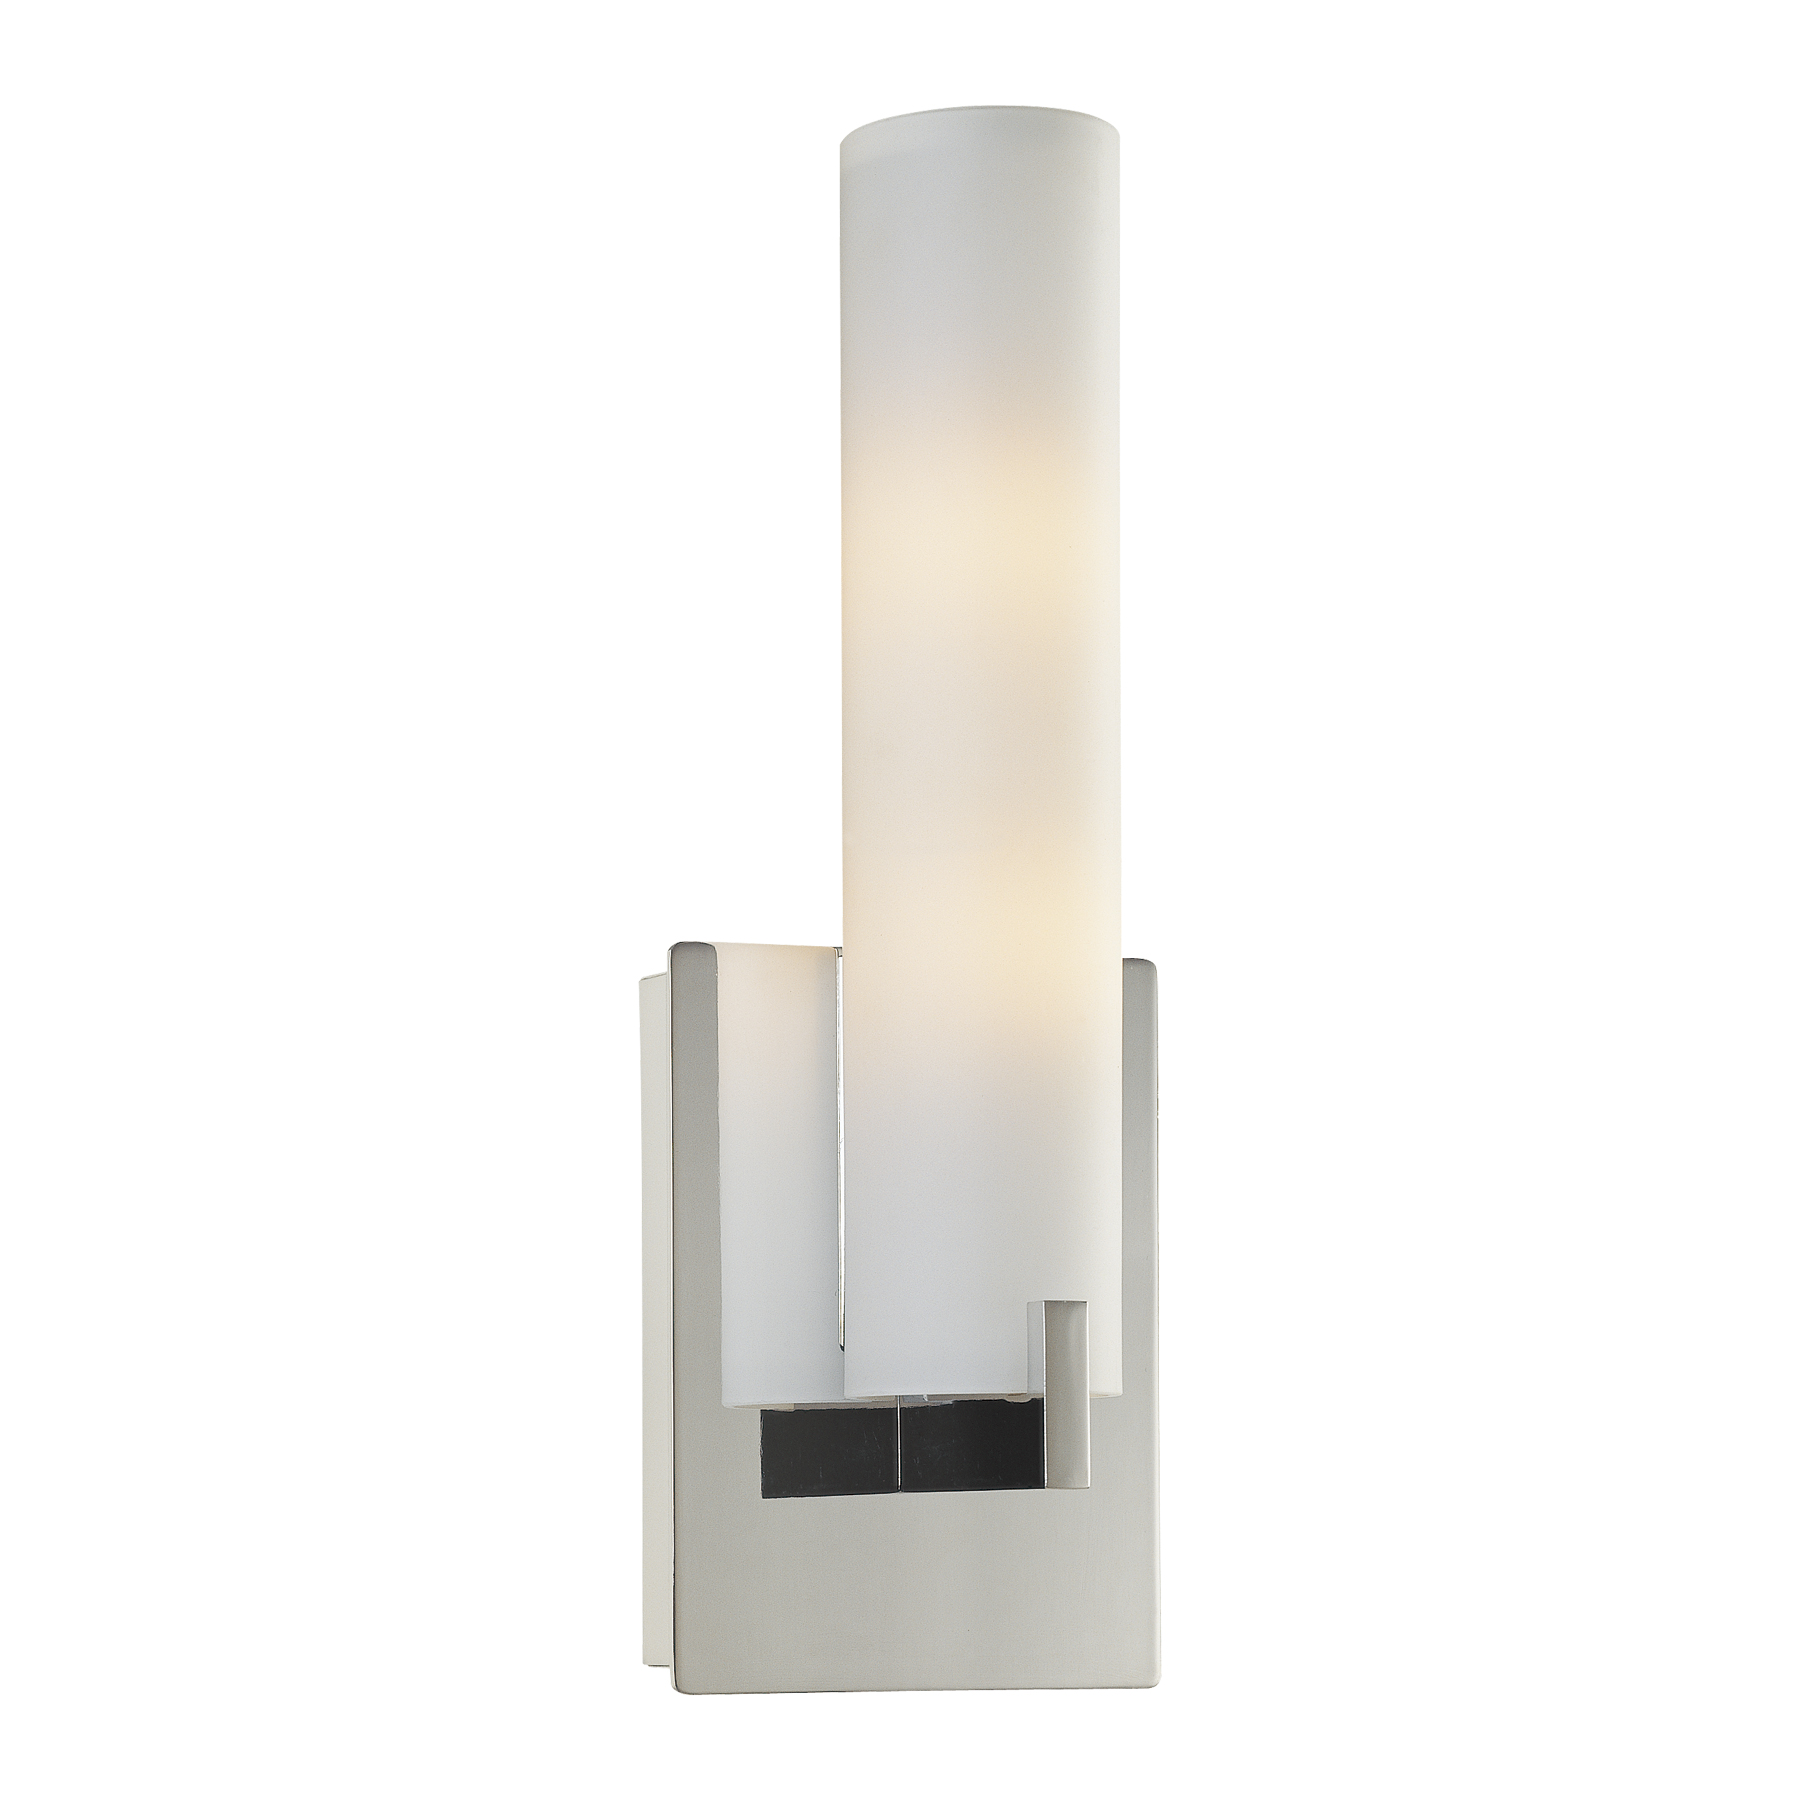 Tube Wall Sconce by George Kovacs p5040-077 GKV59754